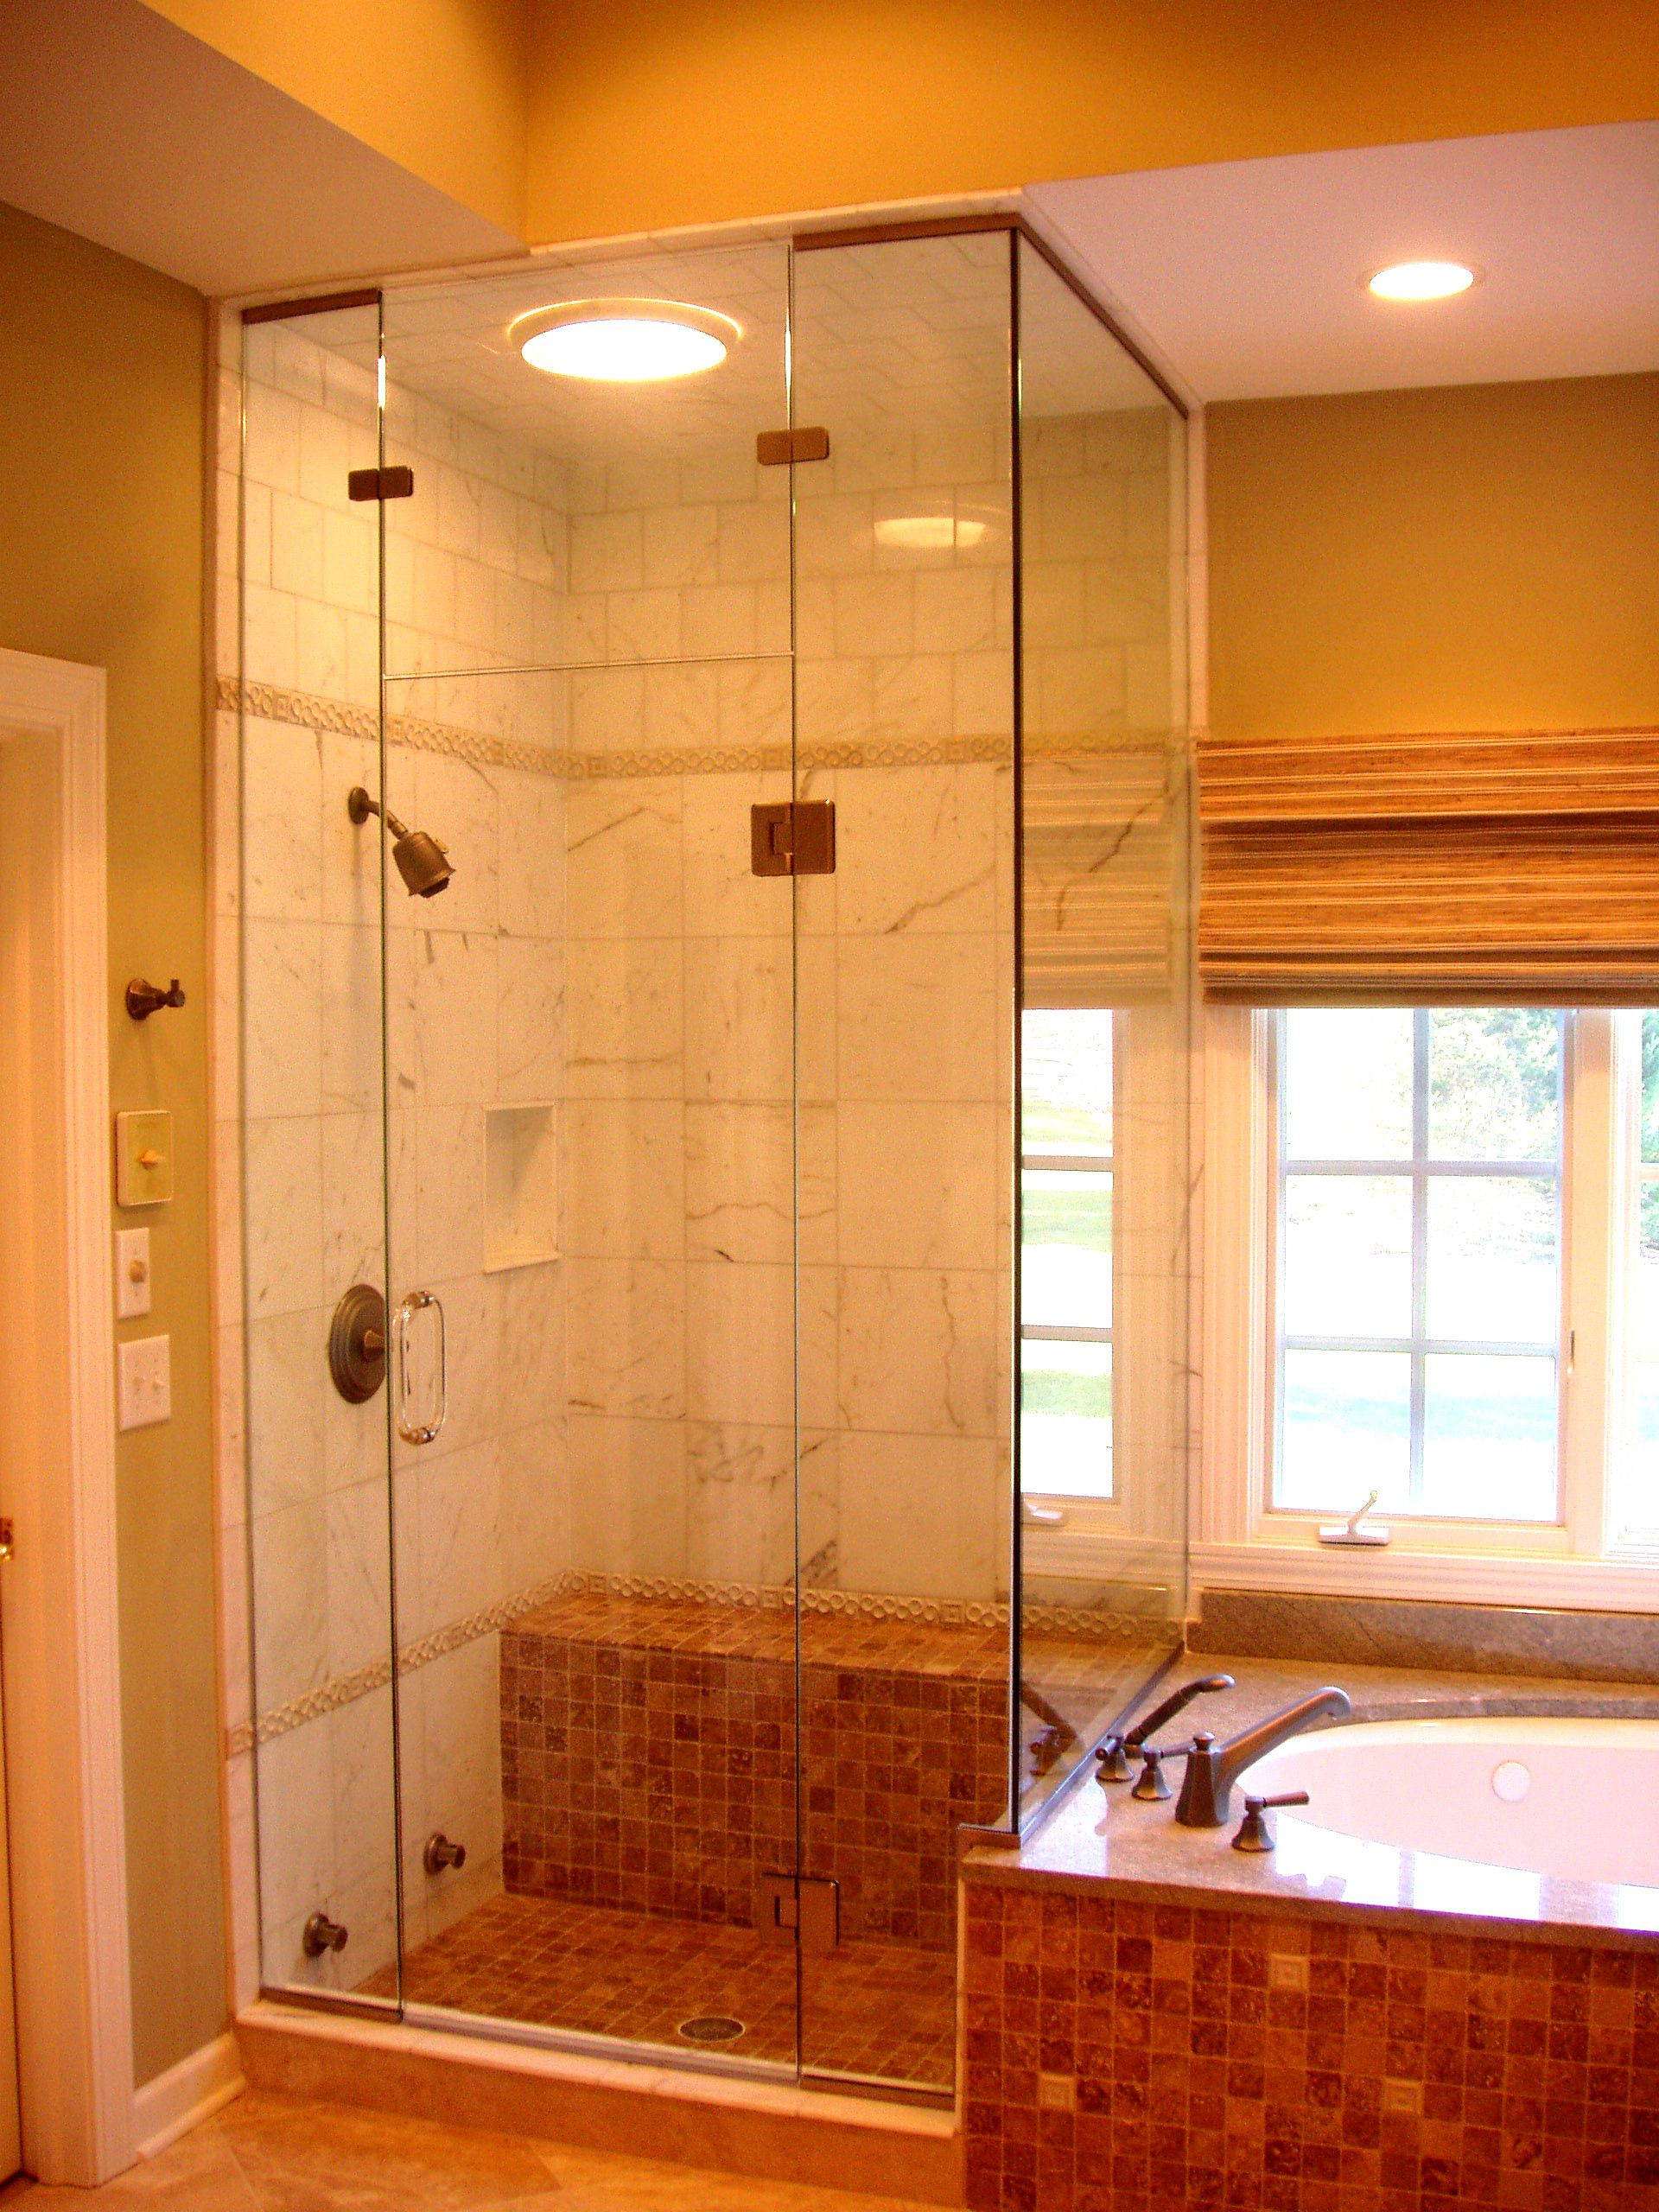 Shower Ideas For Small Bathroom
 Modern Concept of Bathroom Shower Ideas and Tips on